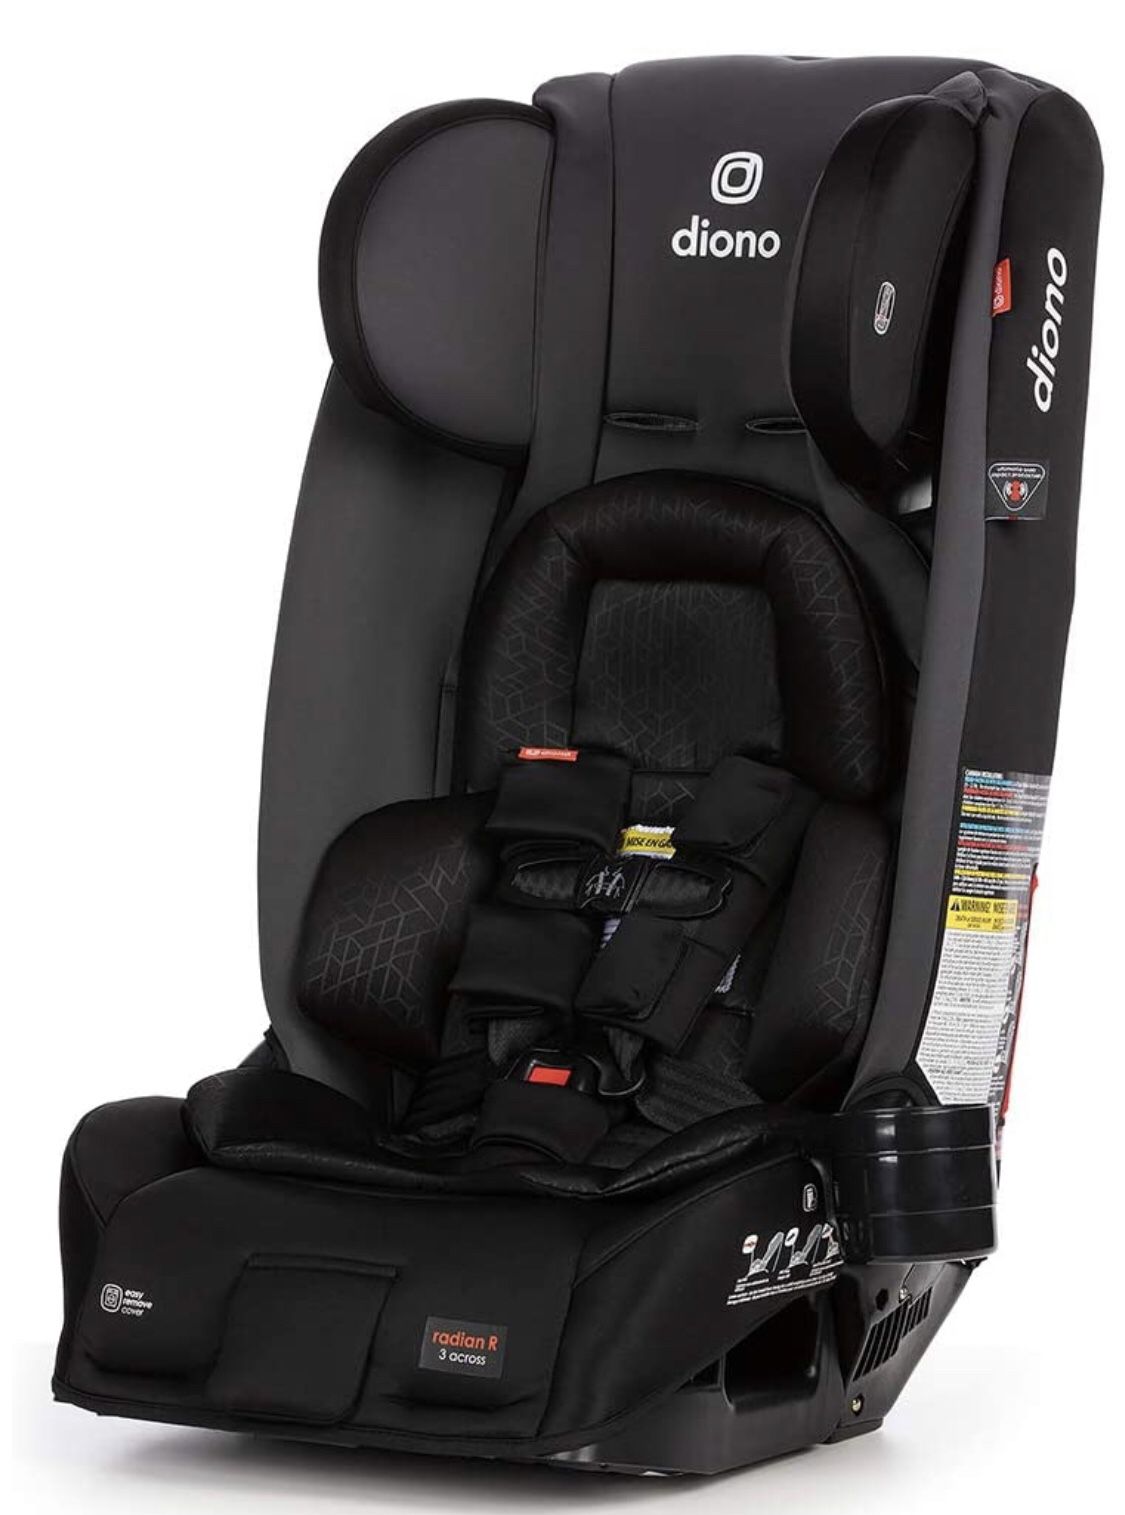 Diono 2020 Radian 3RXT, 4-in-1 Convertible, Extended Rear Facing, 10 Years 1 Car Seat, Fits 3 Across, Slim Fit Design, Gray Slate